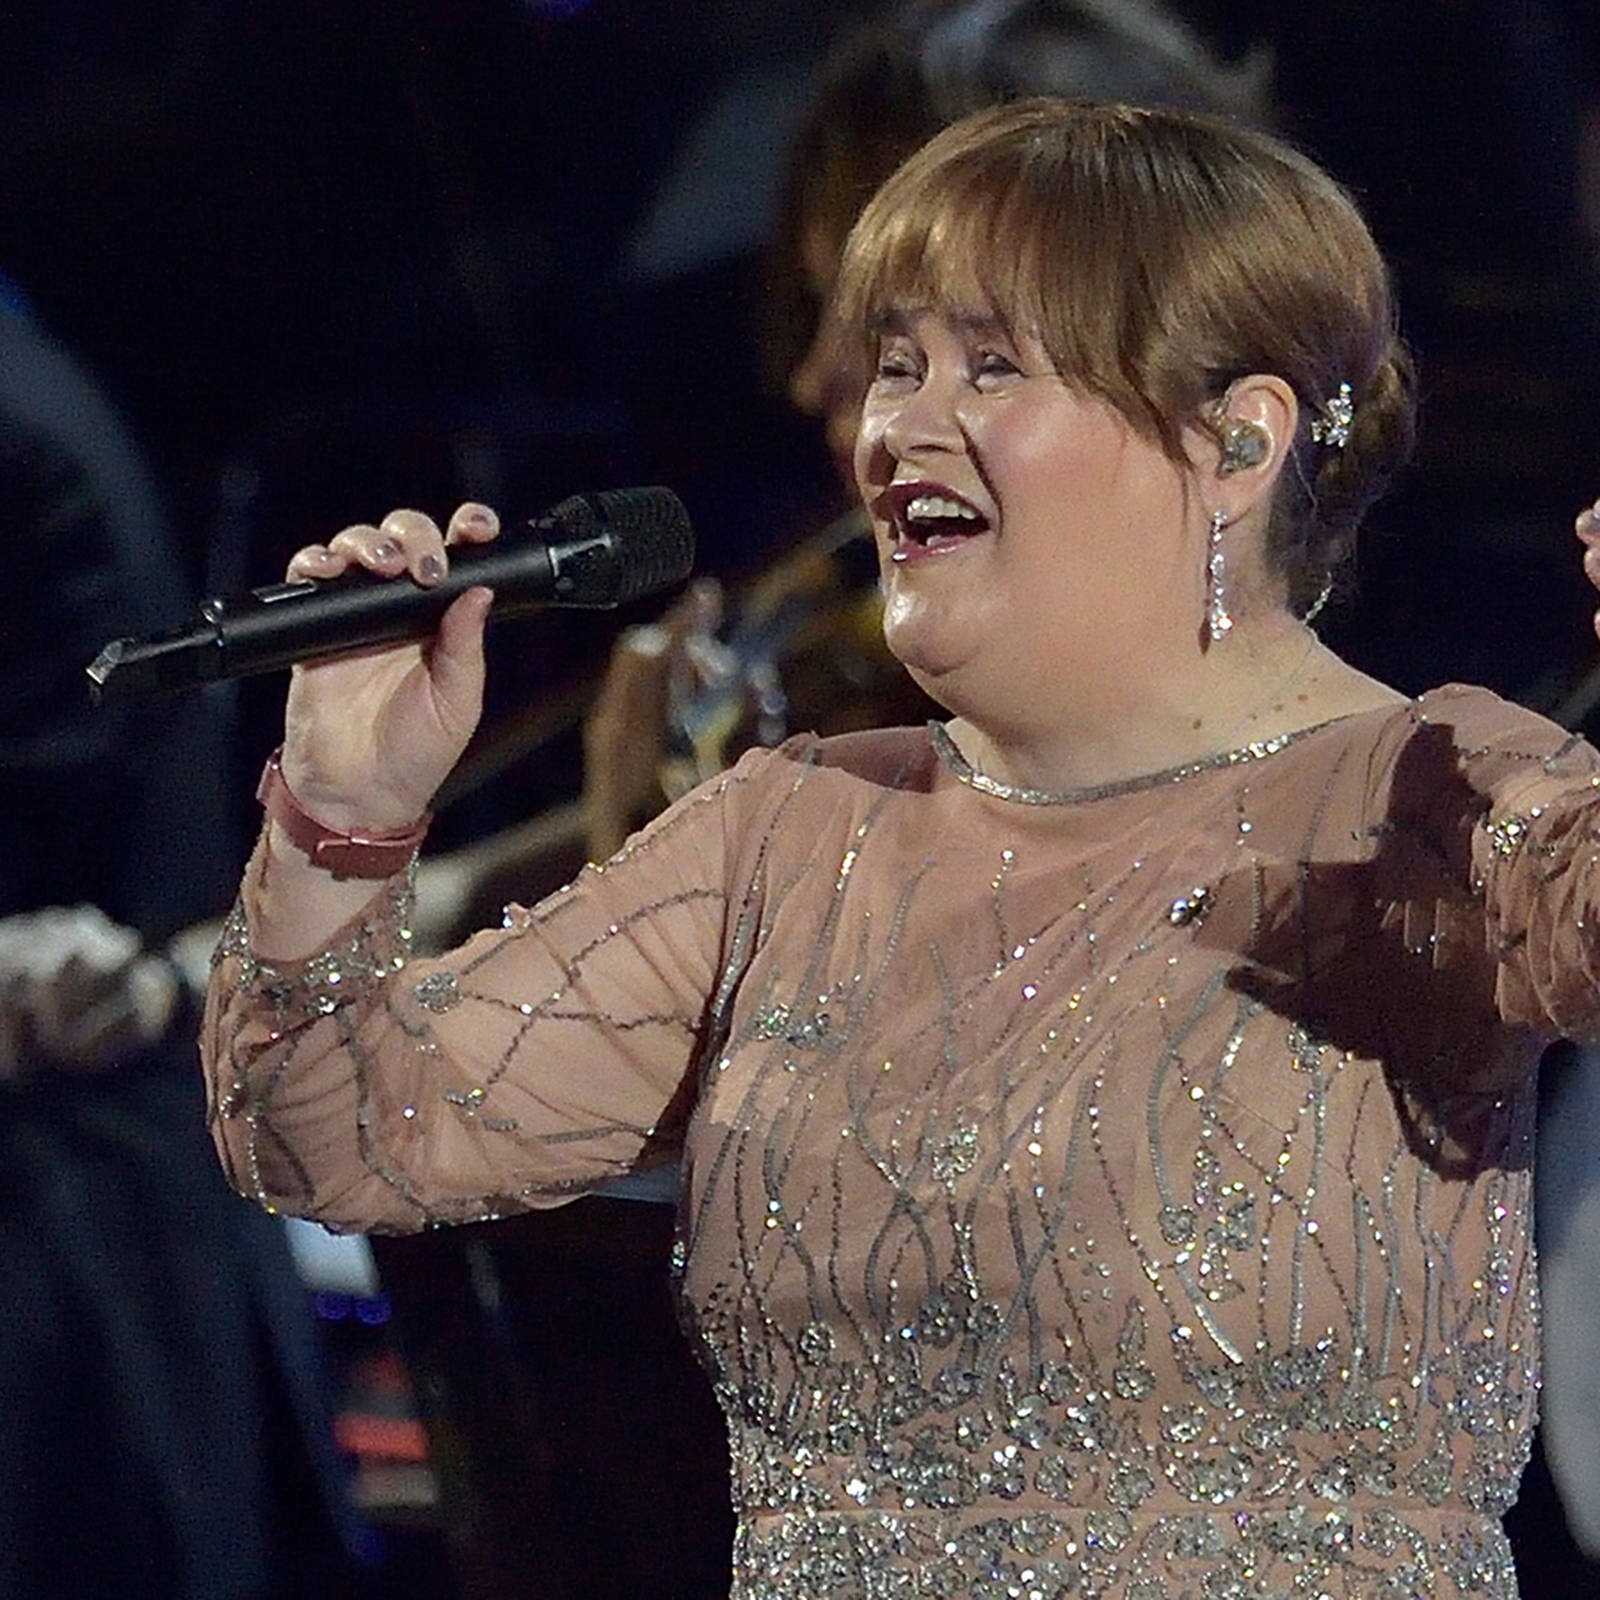 How Susan Boyle's unexpected Olympics appearance stole the show - Classic FM